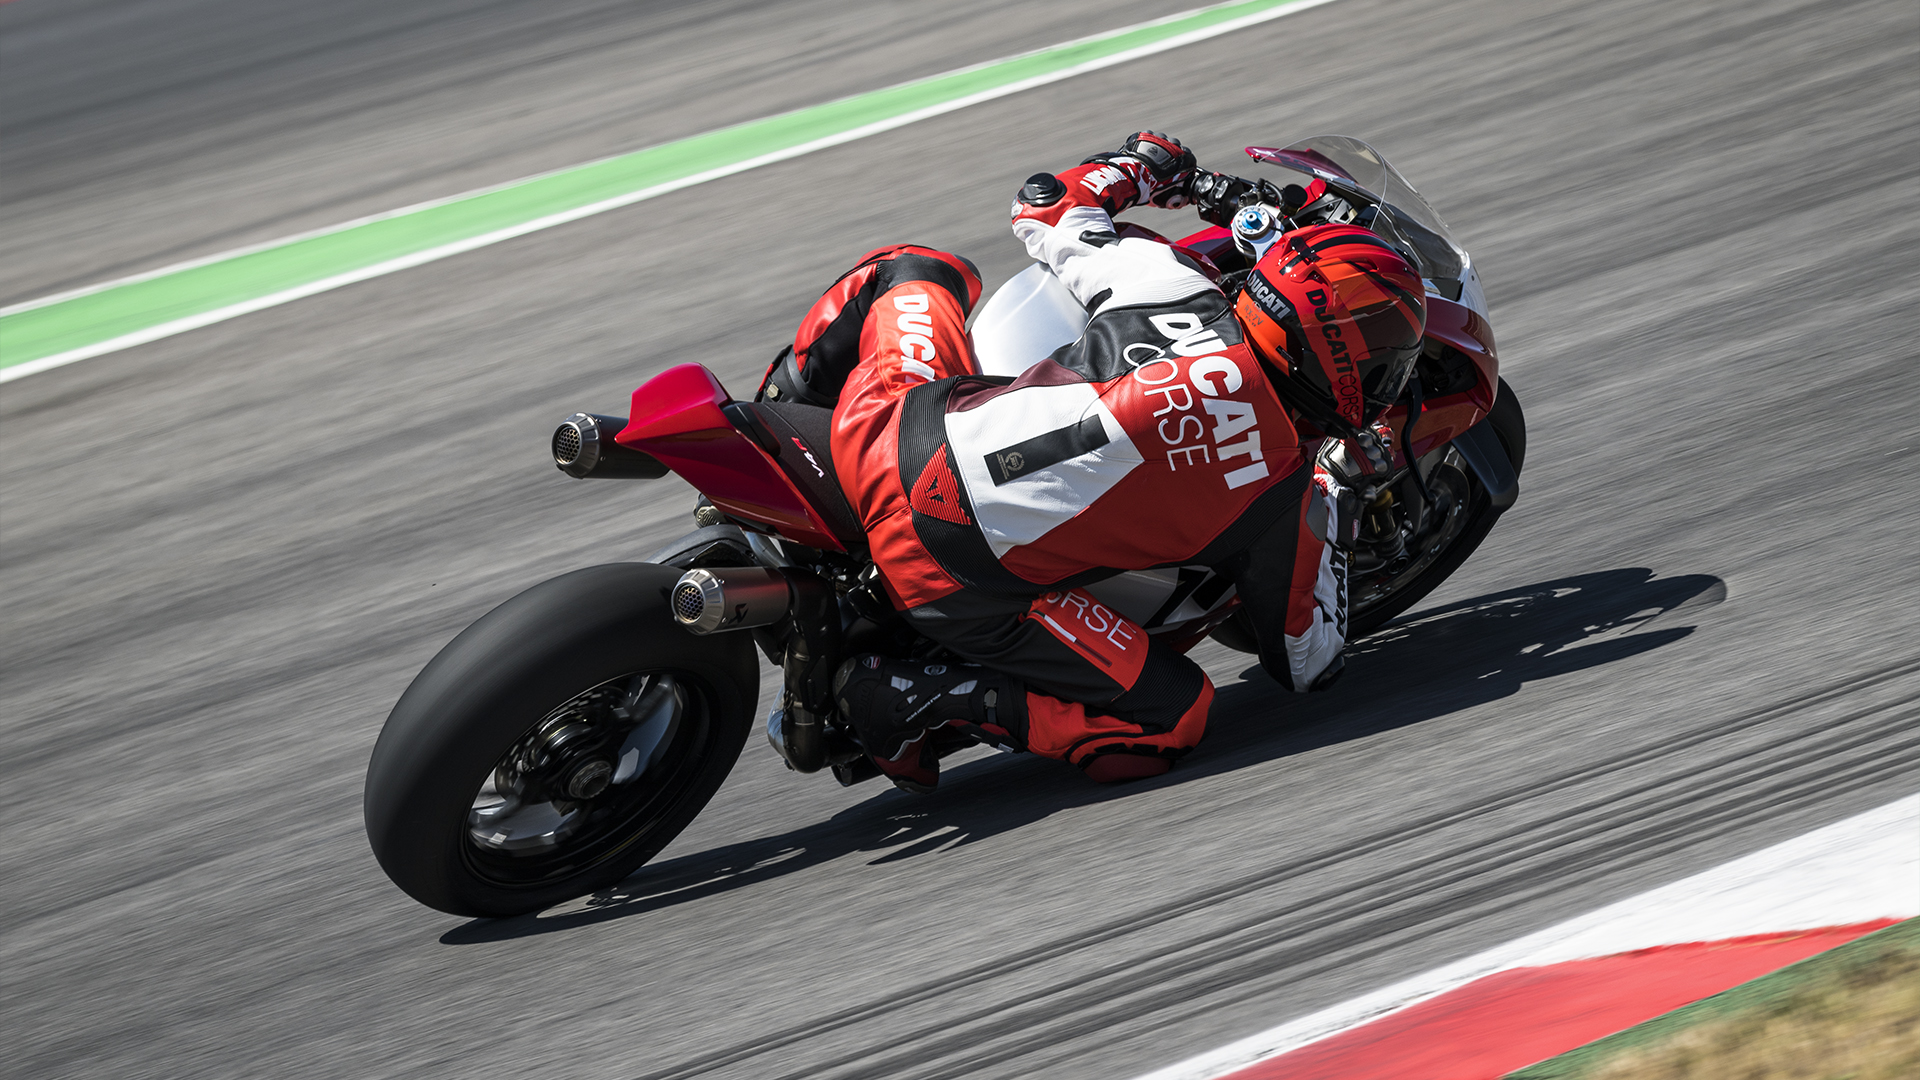 Ducati-Panigale-V4R-MY23-overview-gallery-04-1920x1080